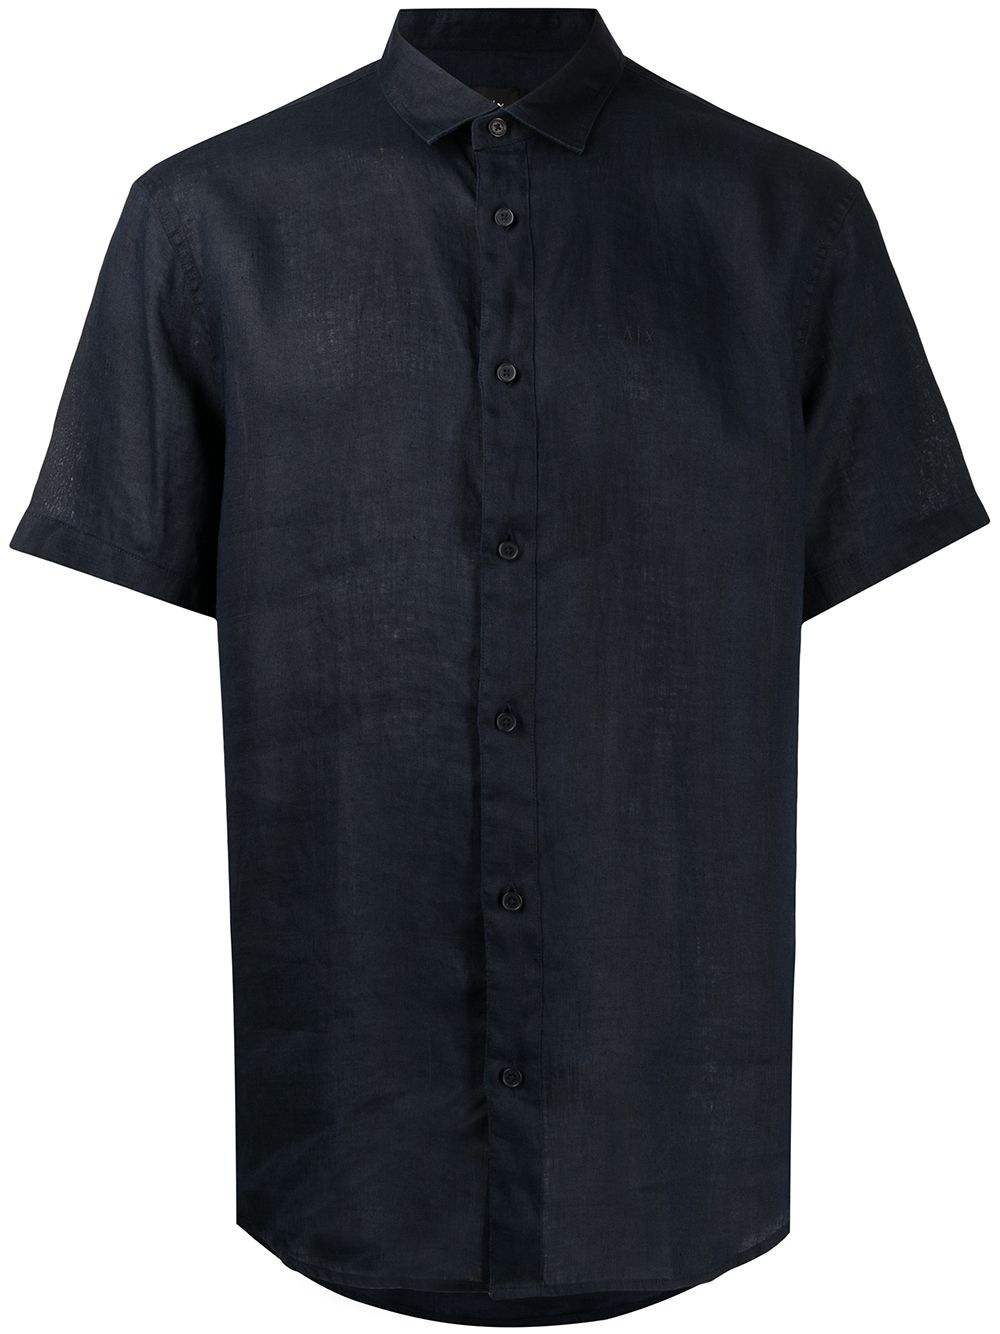 Shop Armani Exchange short-sleeved cotton shirt with Express Delivery ...